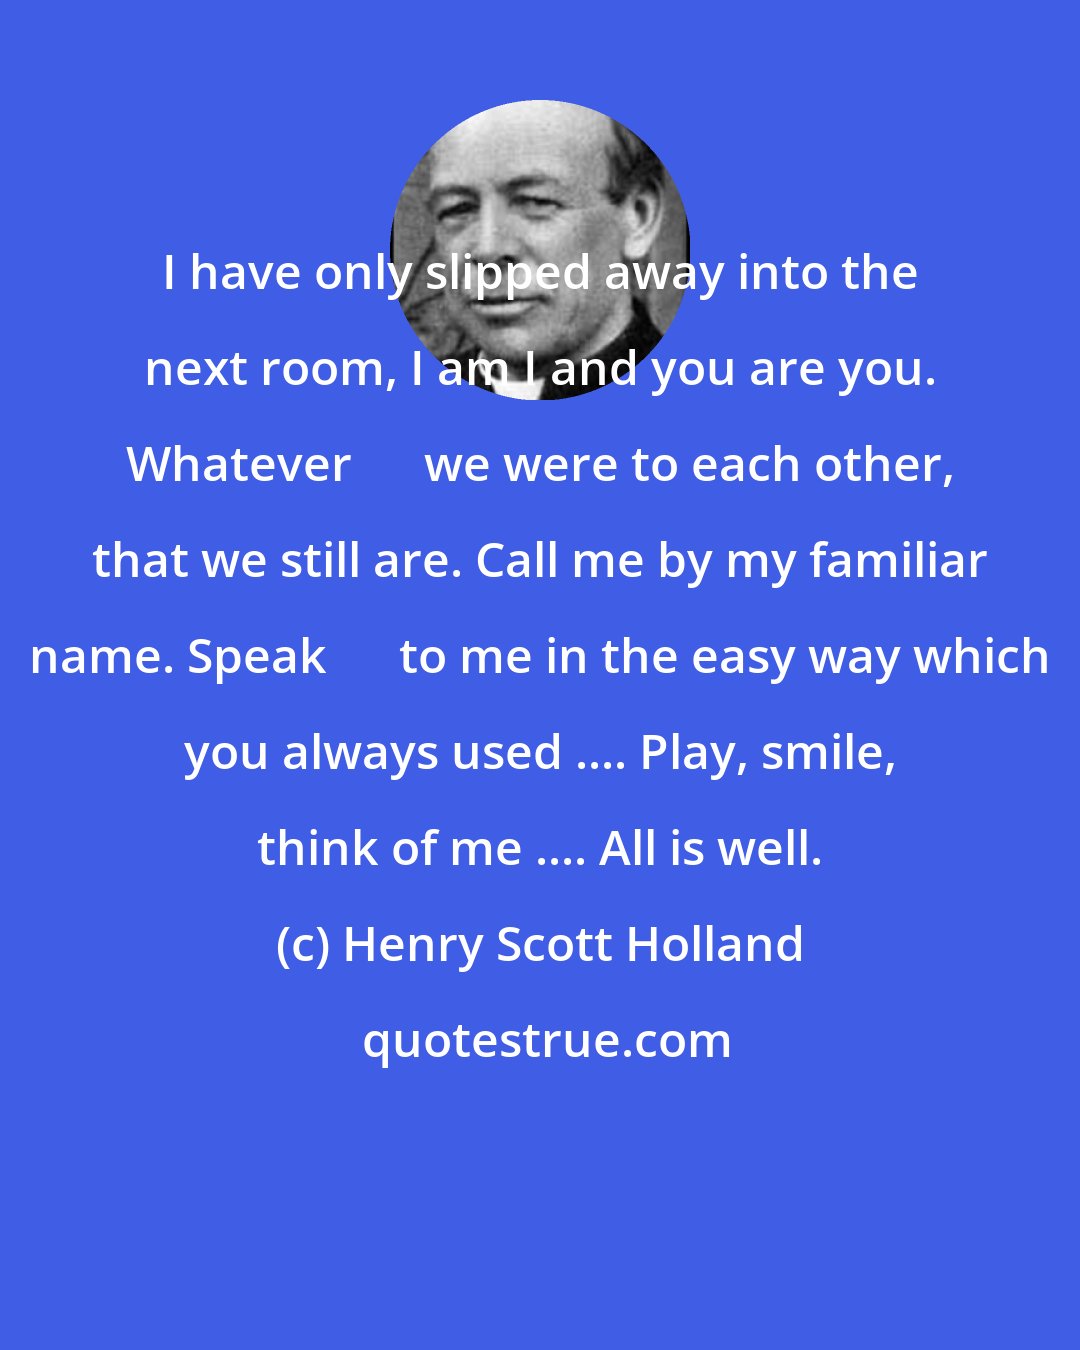 Henry Scott Holland: I have only slipped away into the next room, I am I and you are you. Whatever      we were to each other, that we still are. Call me by my familiar name. Speak      to me in the easy way which you always used .... Play, smile, think of me .... All is well.